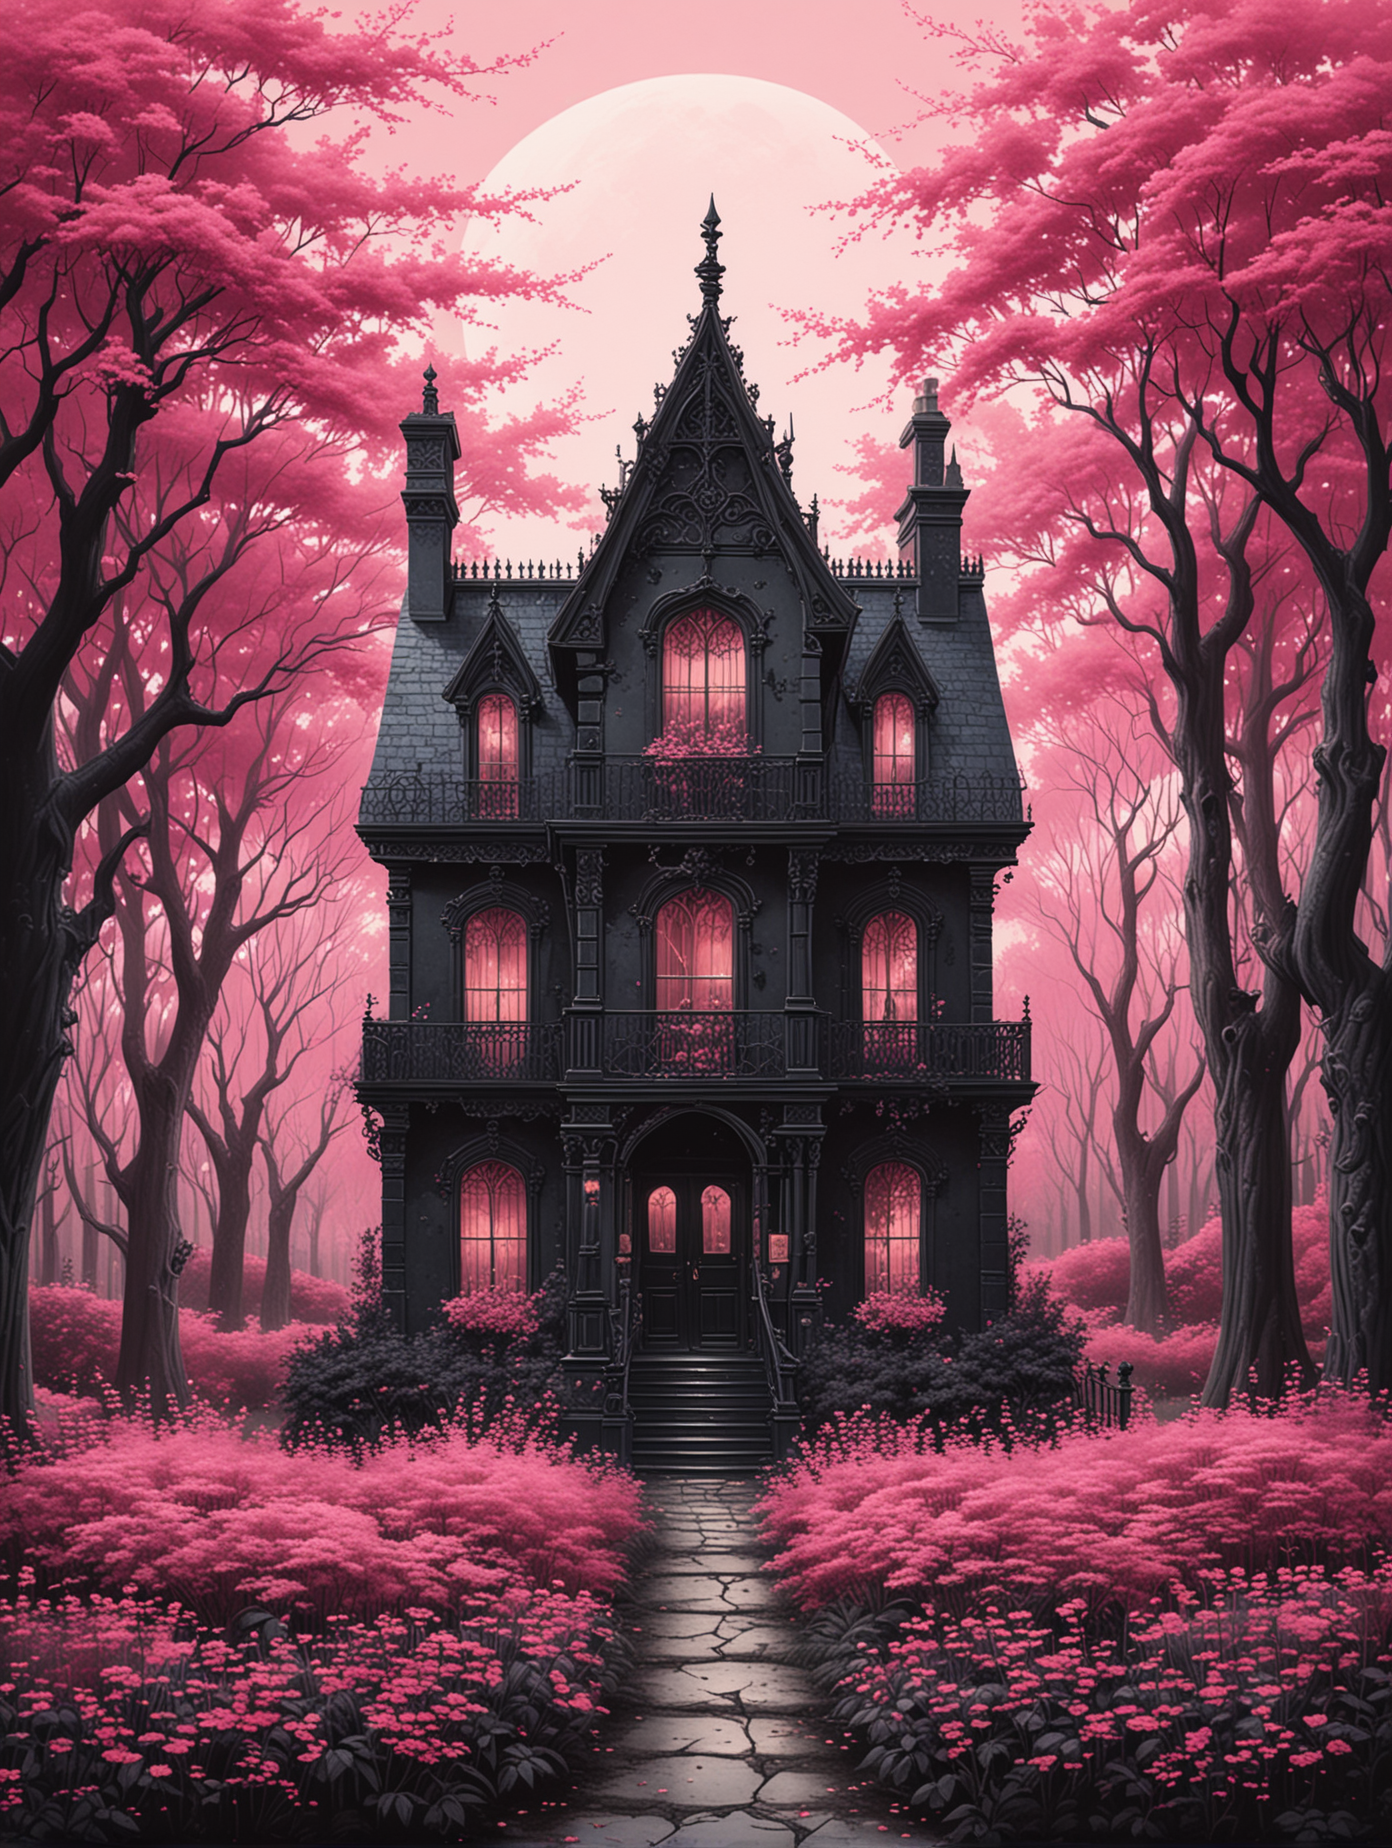 Gothic Black House Surrounded by Pink Bushes in Enigmatic Forest